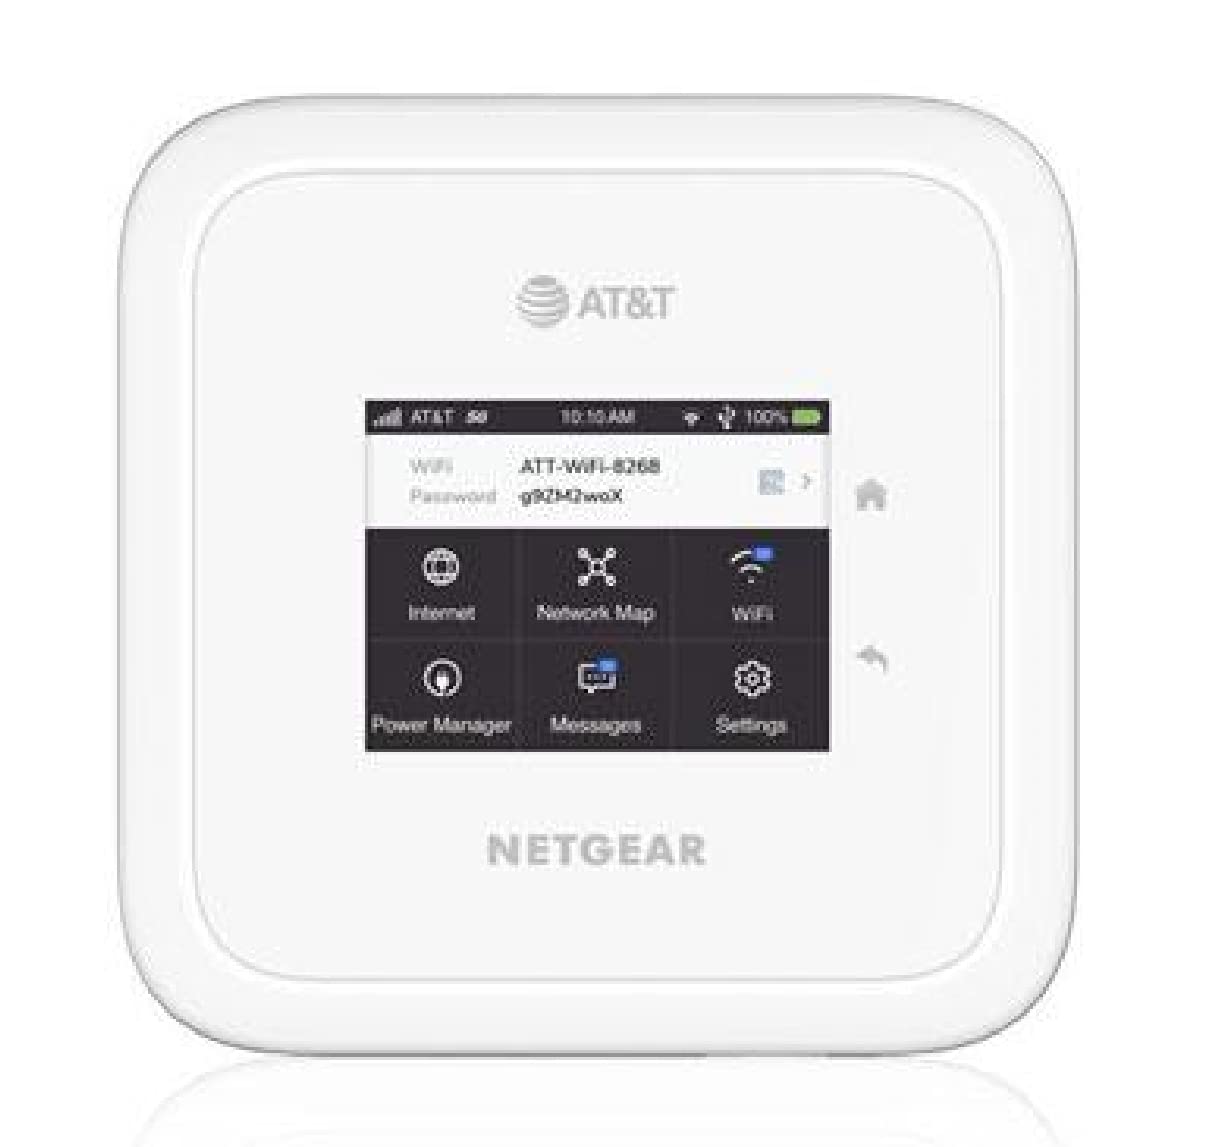 NETGEAR Nighthawk M6 5G WiFi 6 Mobile Hotspot Router (MR6110) – Blazing Fast Wireless Hotspot Router, Unlocked, Certified with AT&T and T-Mobile - White (Renewed)